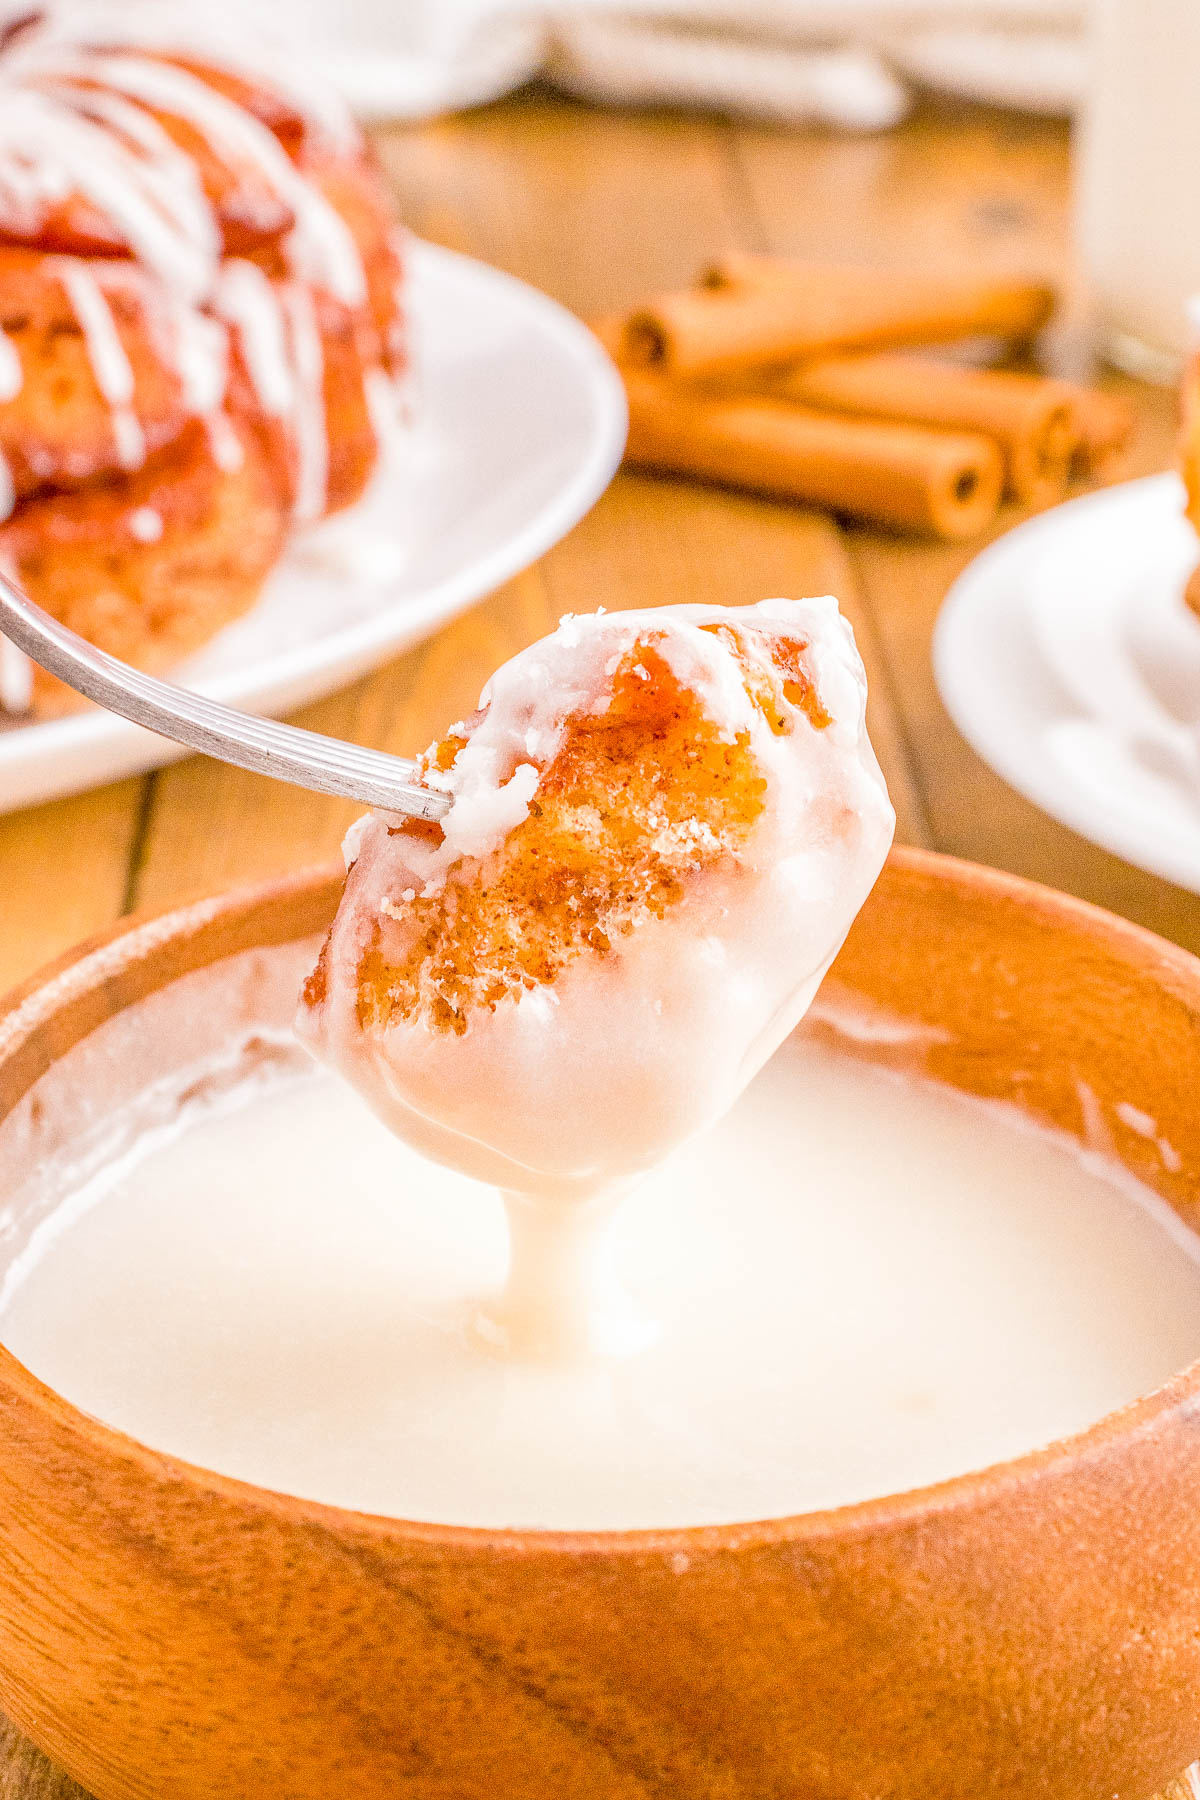 A cinnamon roll being dipped into a bowl of white glaze, with additional rolls and cinnamon sticks blurred in the background.